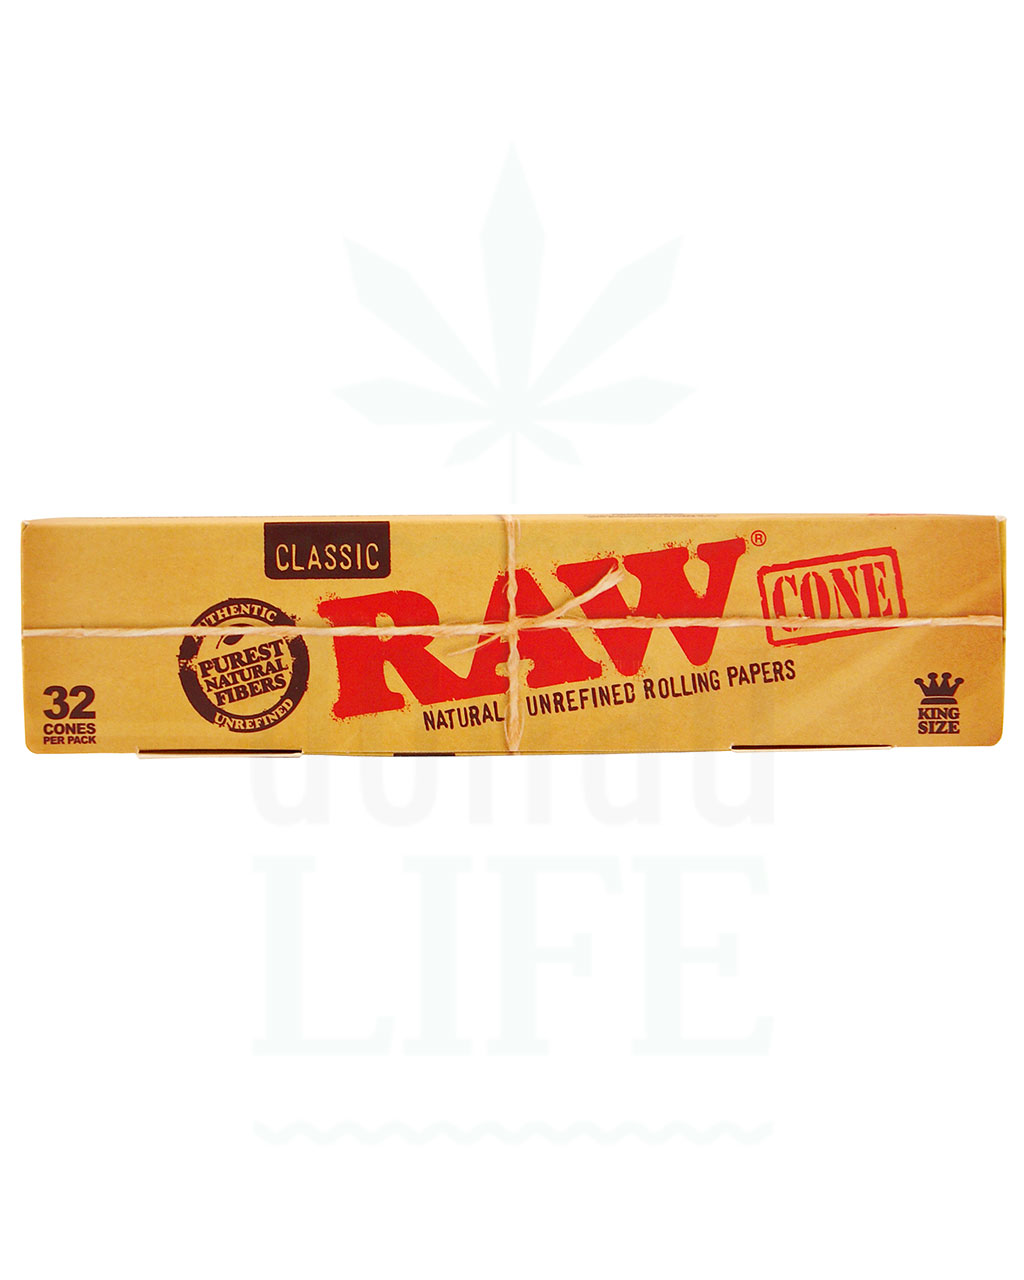 Papers RAW Classic Cones King Size | 32 Stück